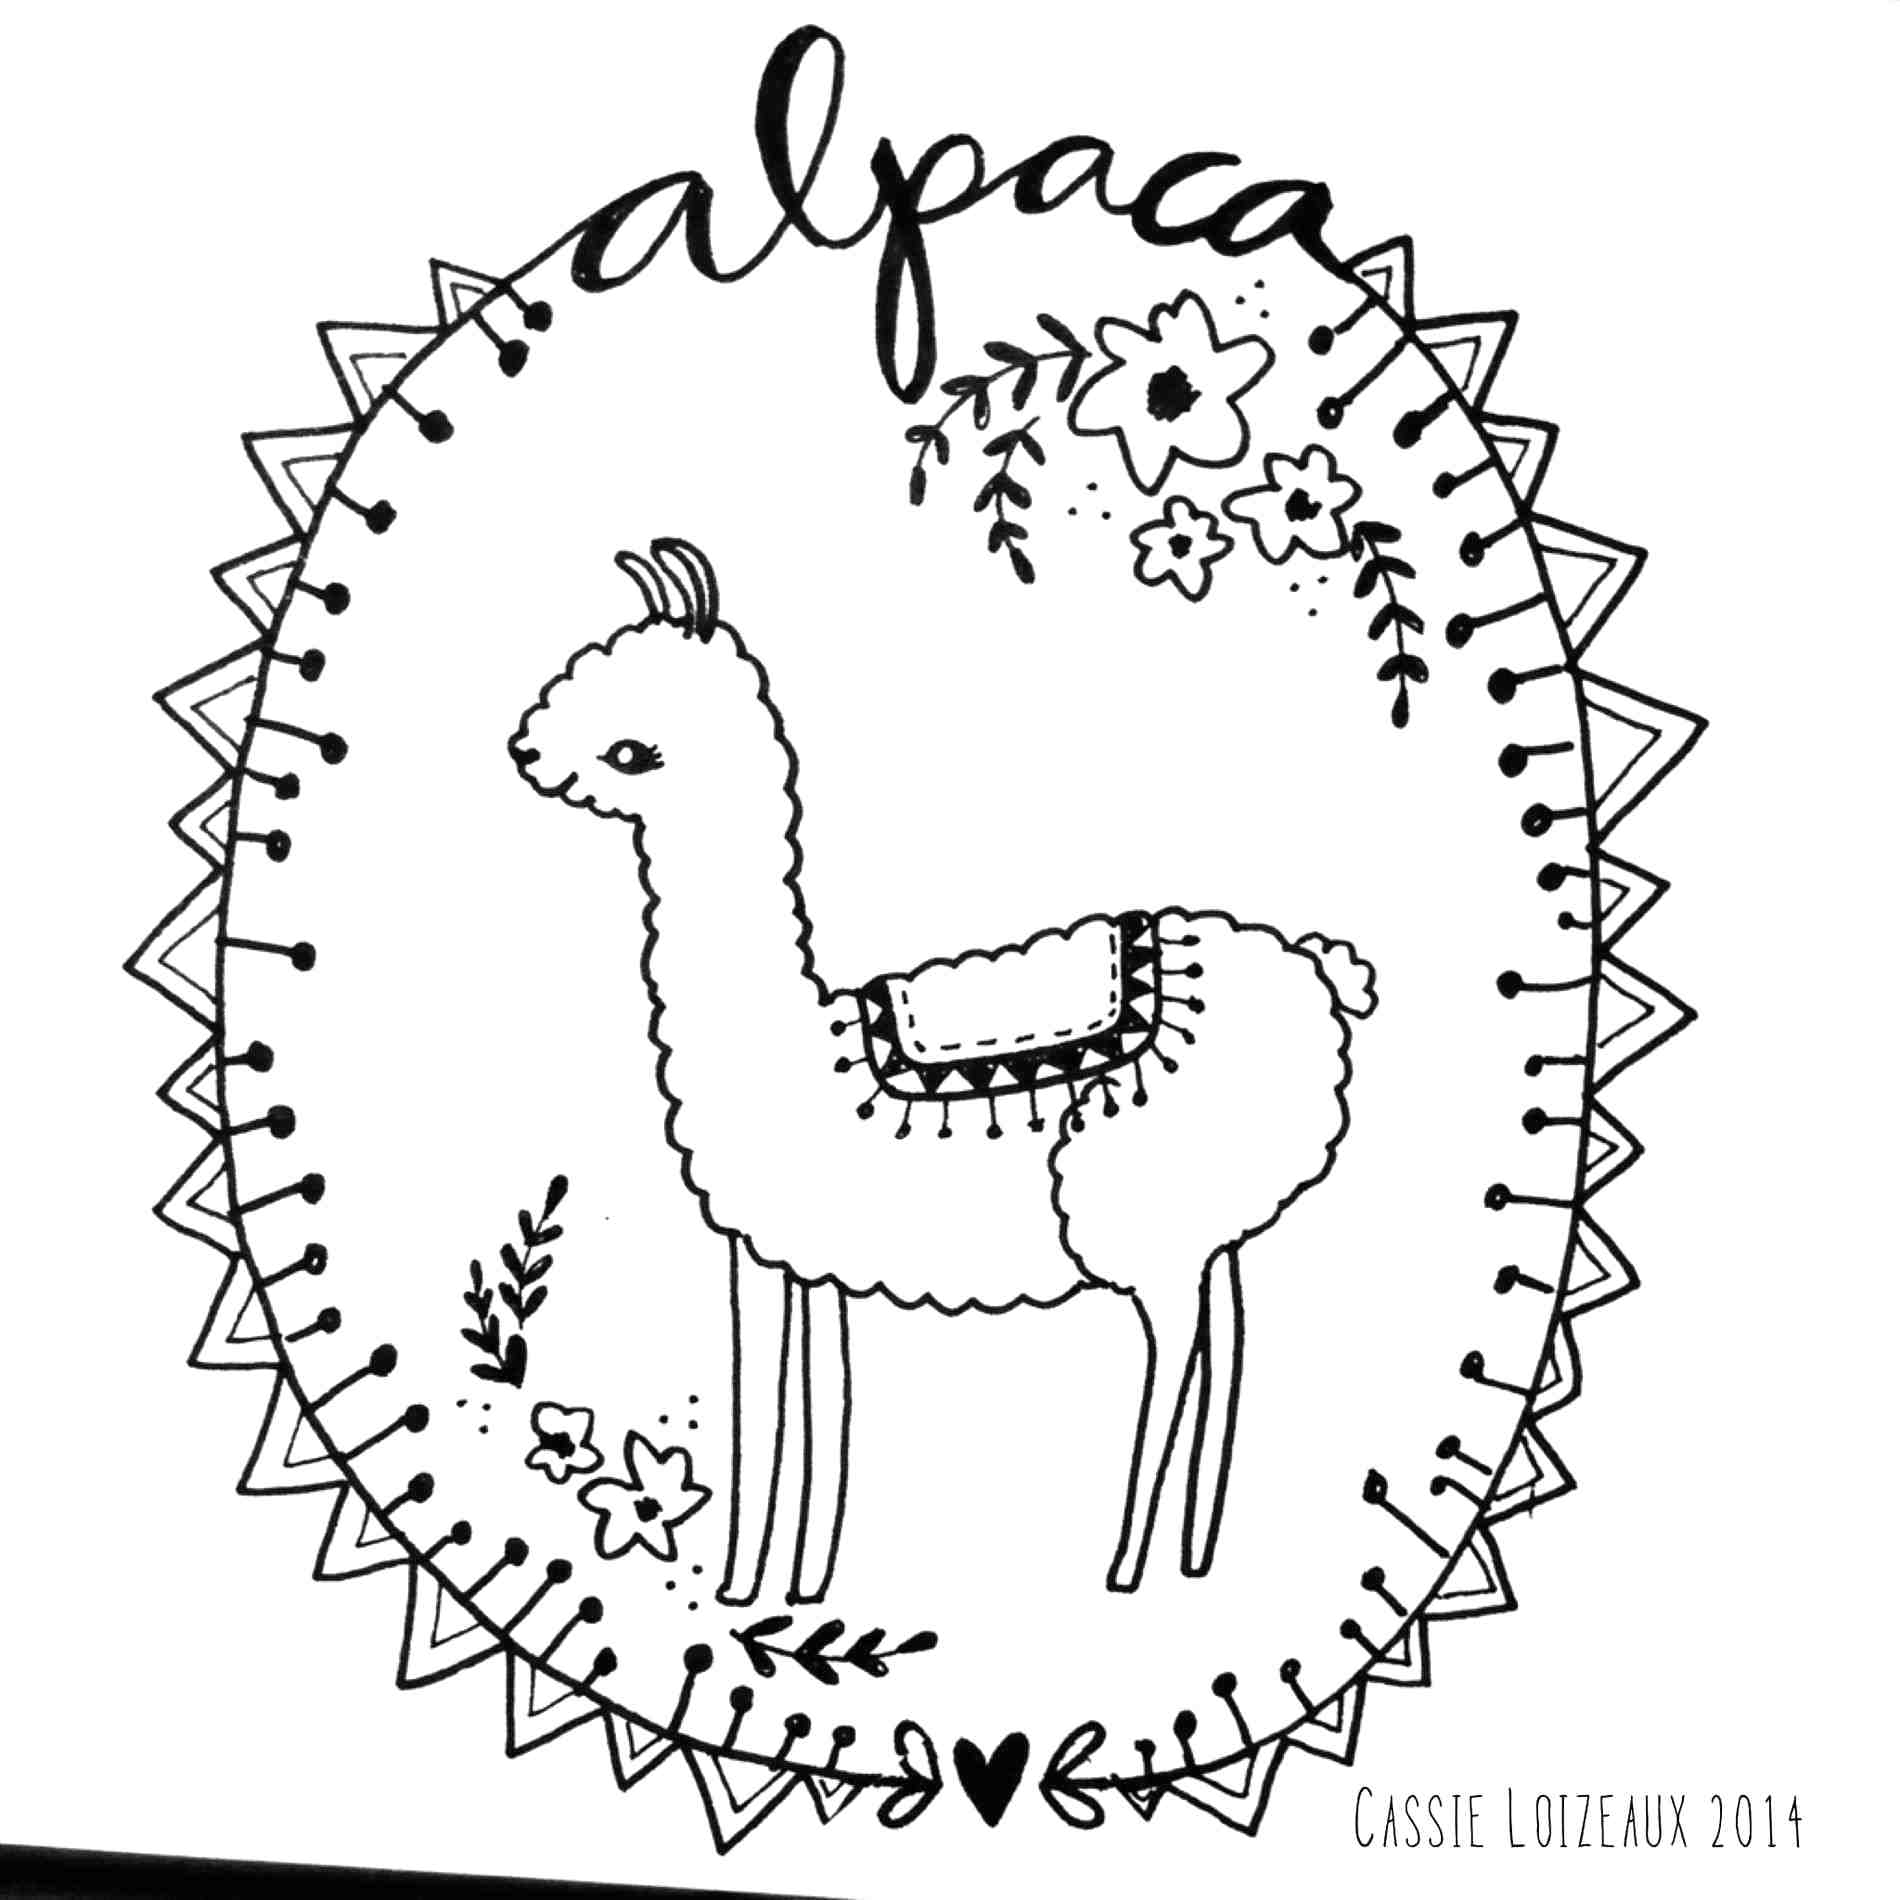 Coloring Pages : Amazing Alpaca Coloring Page Alpaca Coloring Page Cute  Puppy‚ Kawaii Alpaca Coloring Page Cute‚ Free Alpaca Coloring Pages For  Kids as well as Coloring Pagess